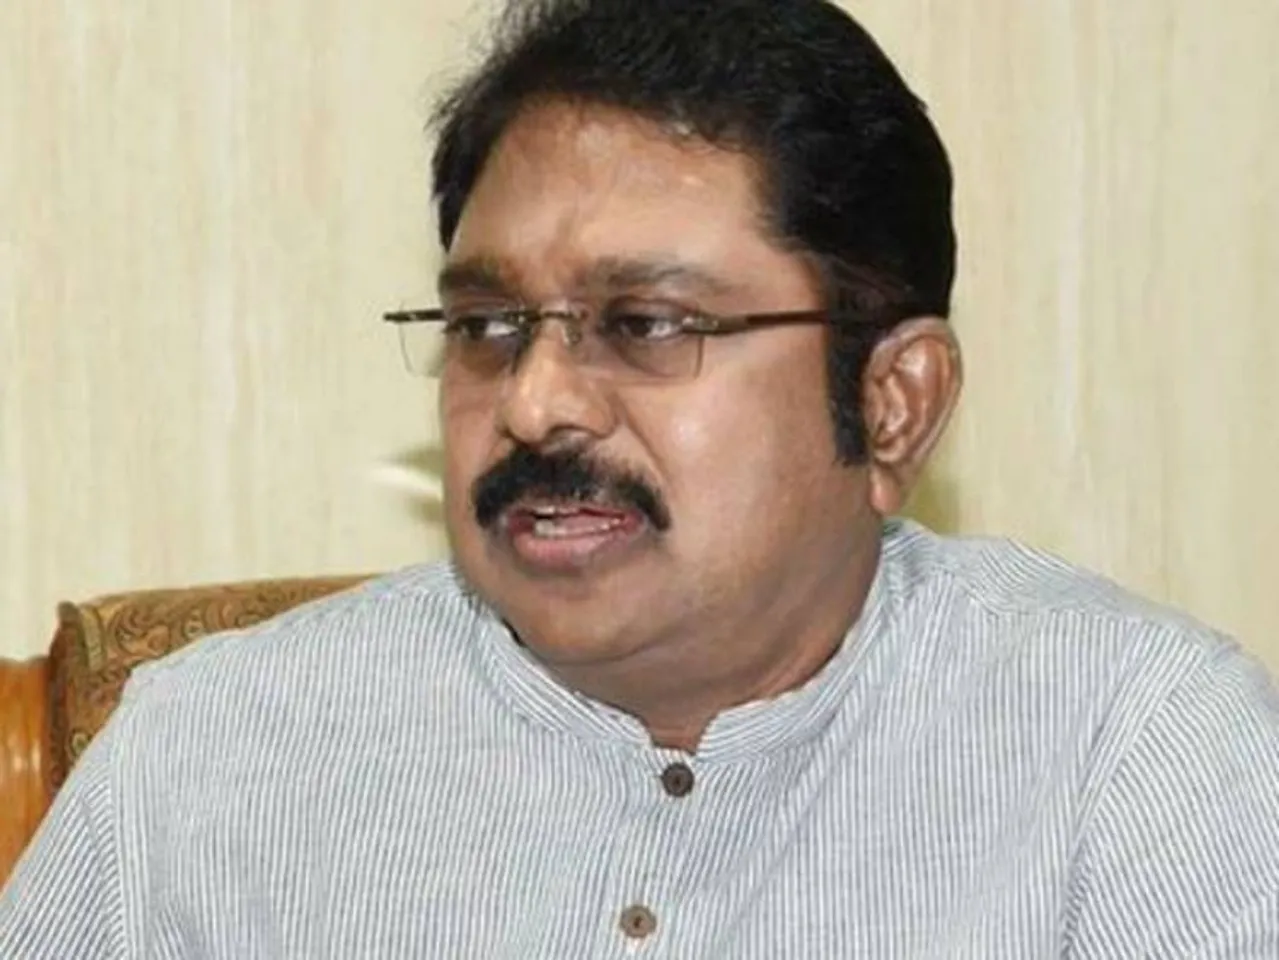 two leaves symbol case,election commission dismissed ttv dhinakaran petition, setback to ttv dhinakaran in two leaves symbol case